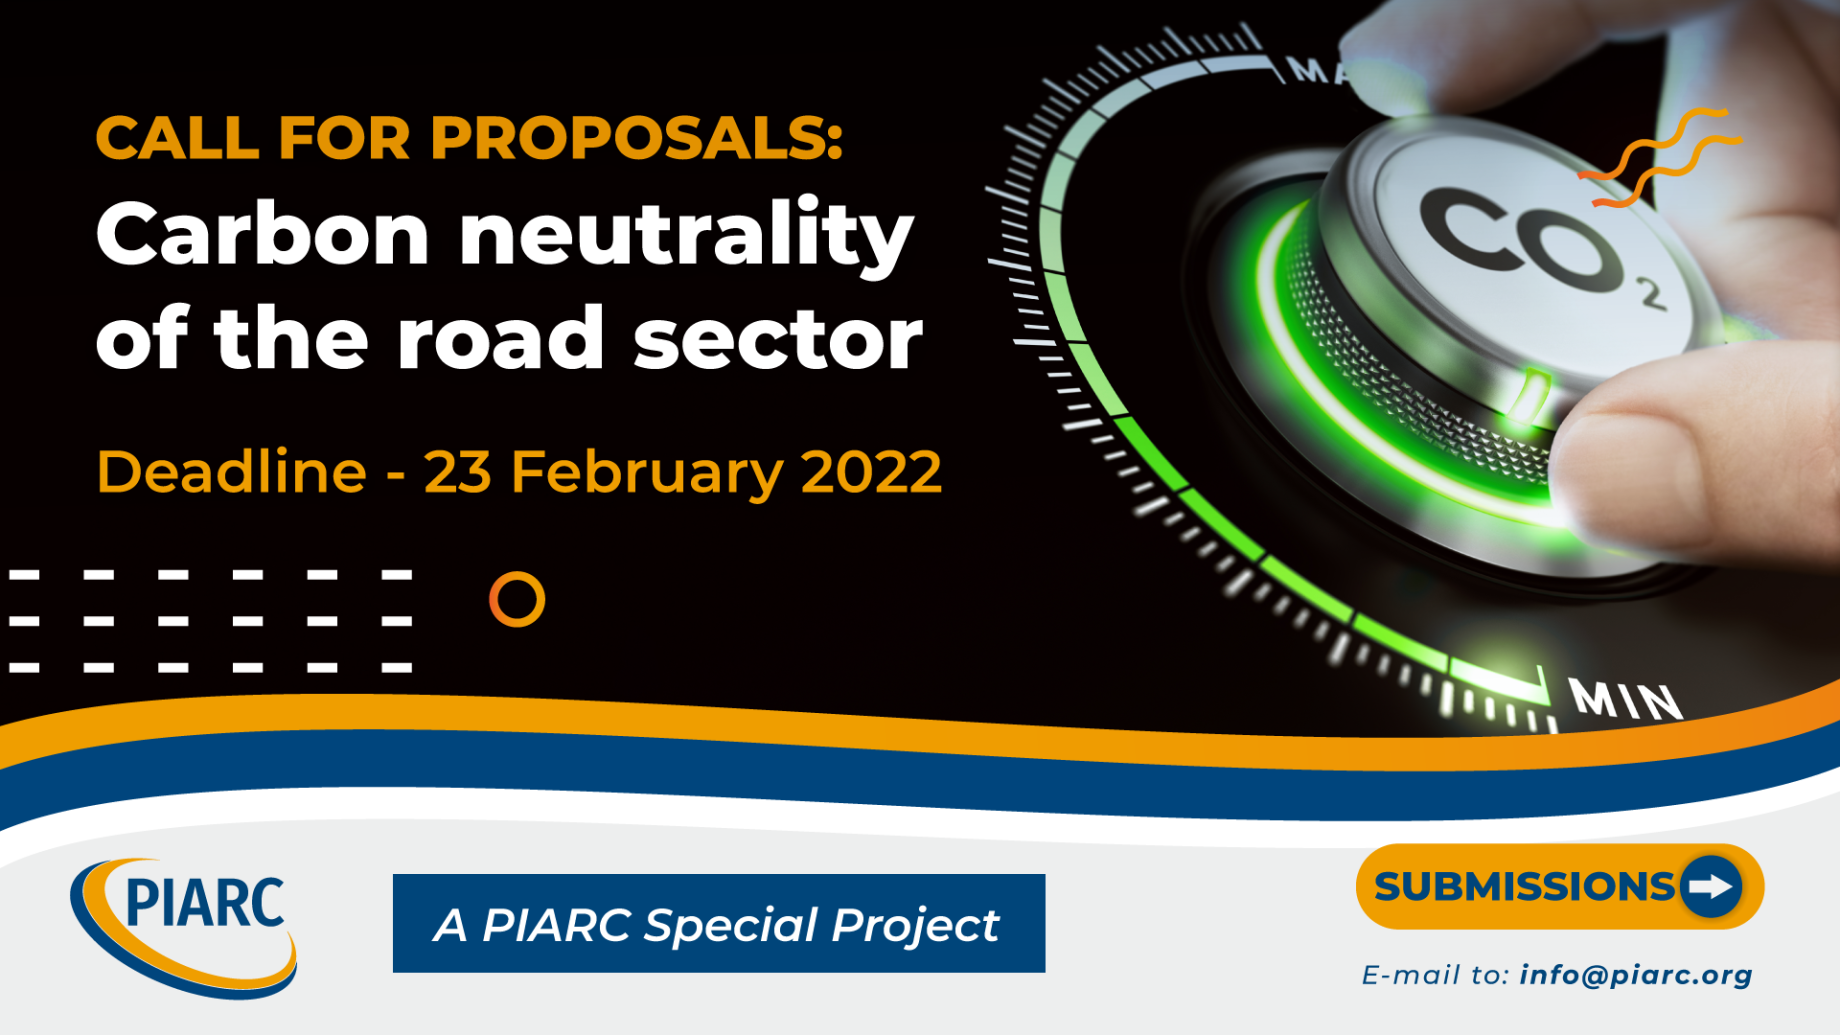 PIARC launches a new call for proposals: special project on carbon neutrality in the road sector. Get involved!